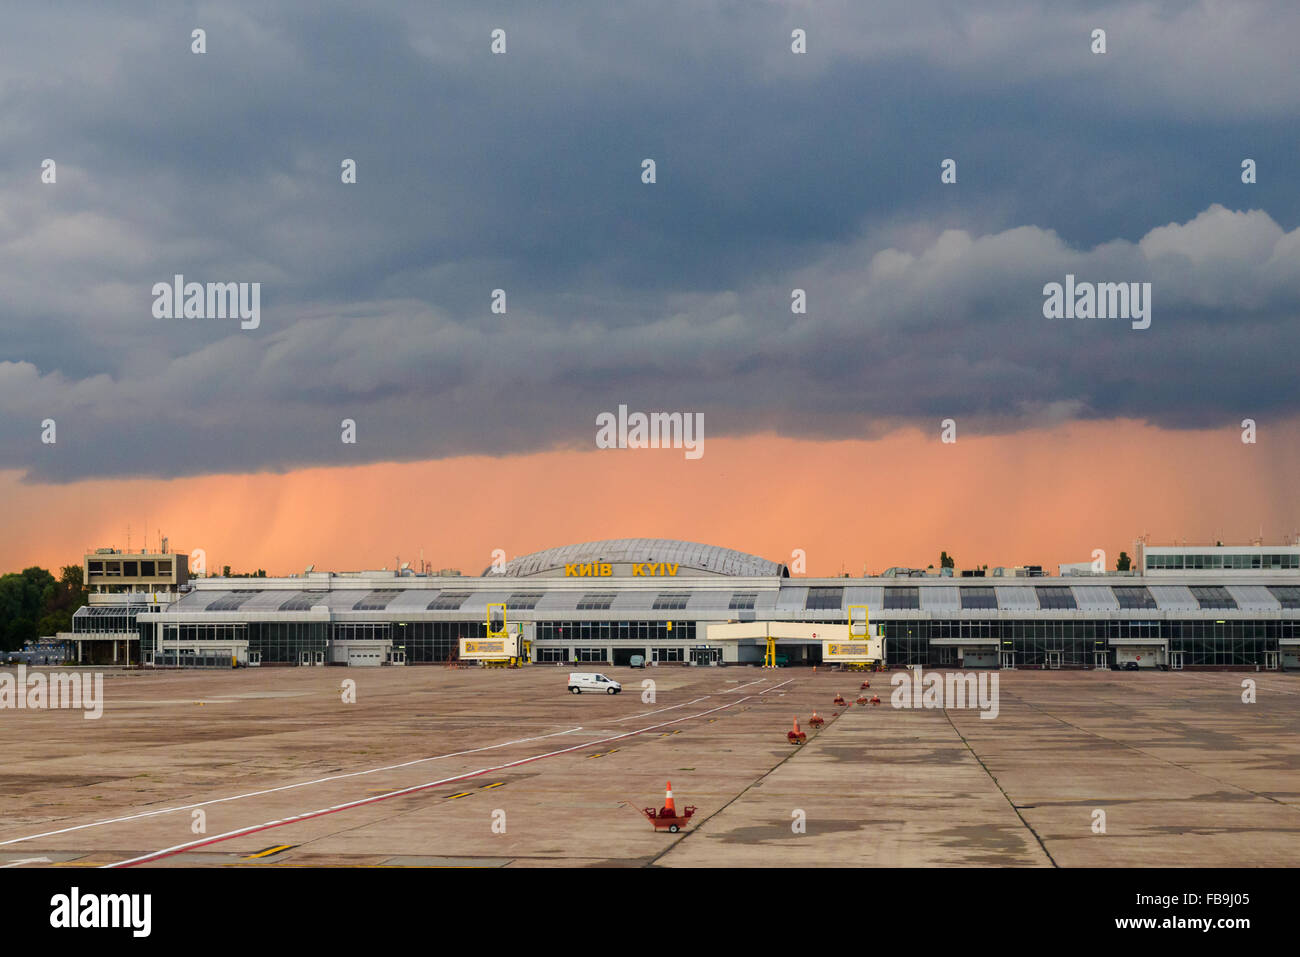 Building of Boryspil airport at sunset when rain is coming, Kiev, Ukraine Stock Photo